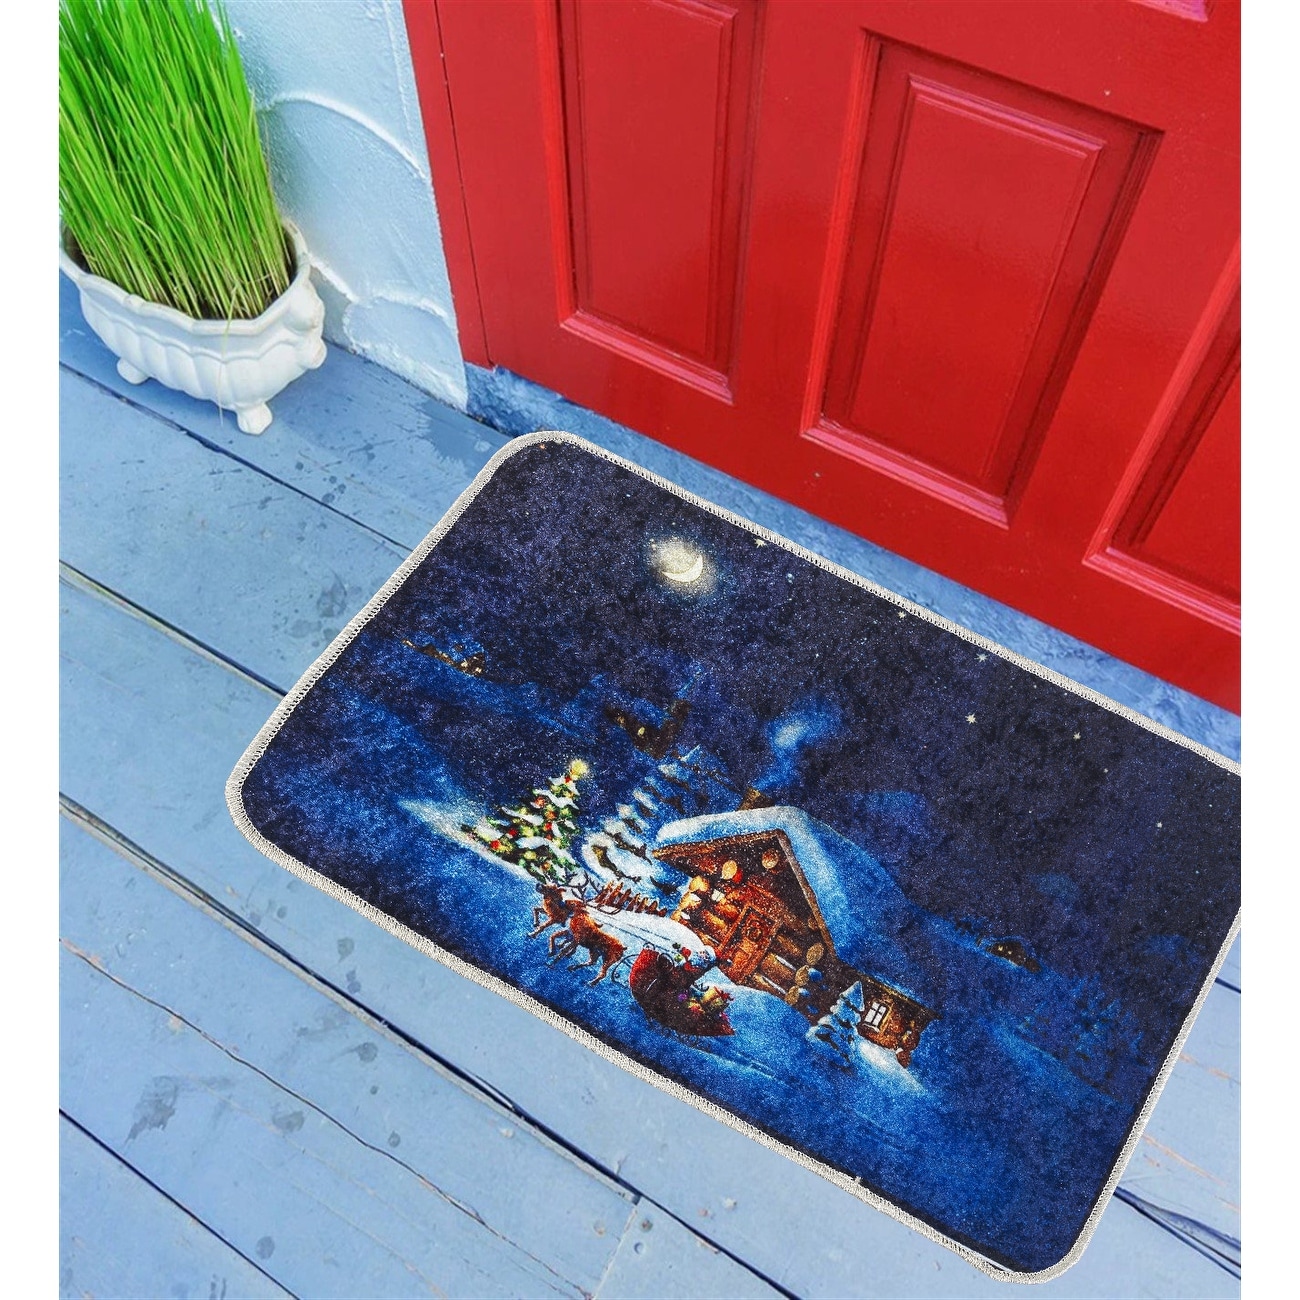 https://ak1.ostkcdn.com/images/products/is/images/direct/3efd743c730f366f0a39f090905c2a8182fe4e7d/Winter-Floor-Mat%2C-30x20.jpg